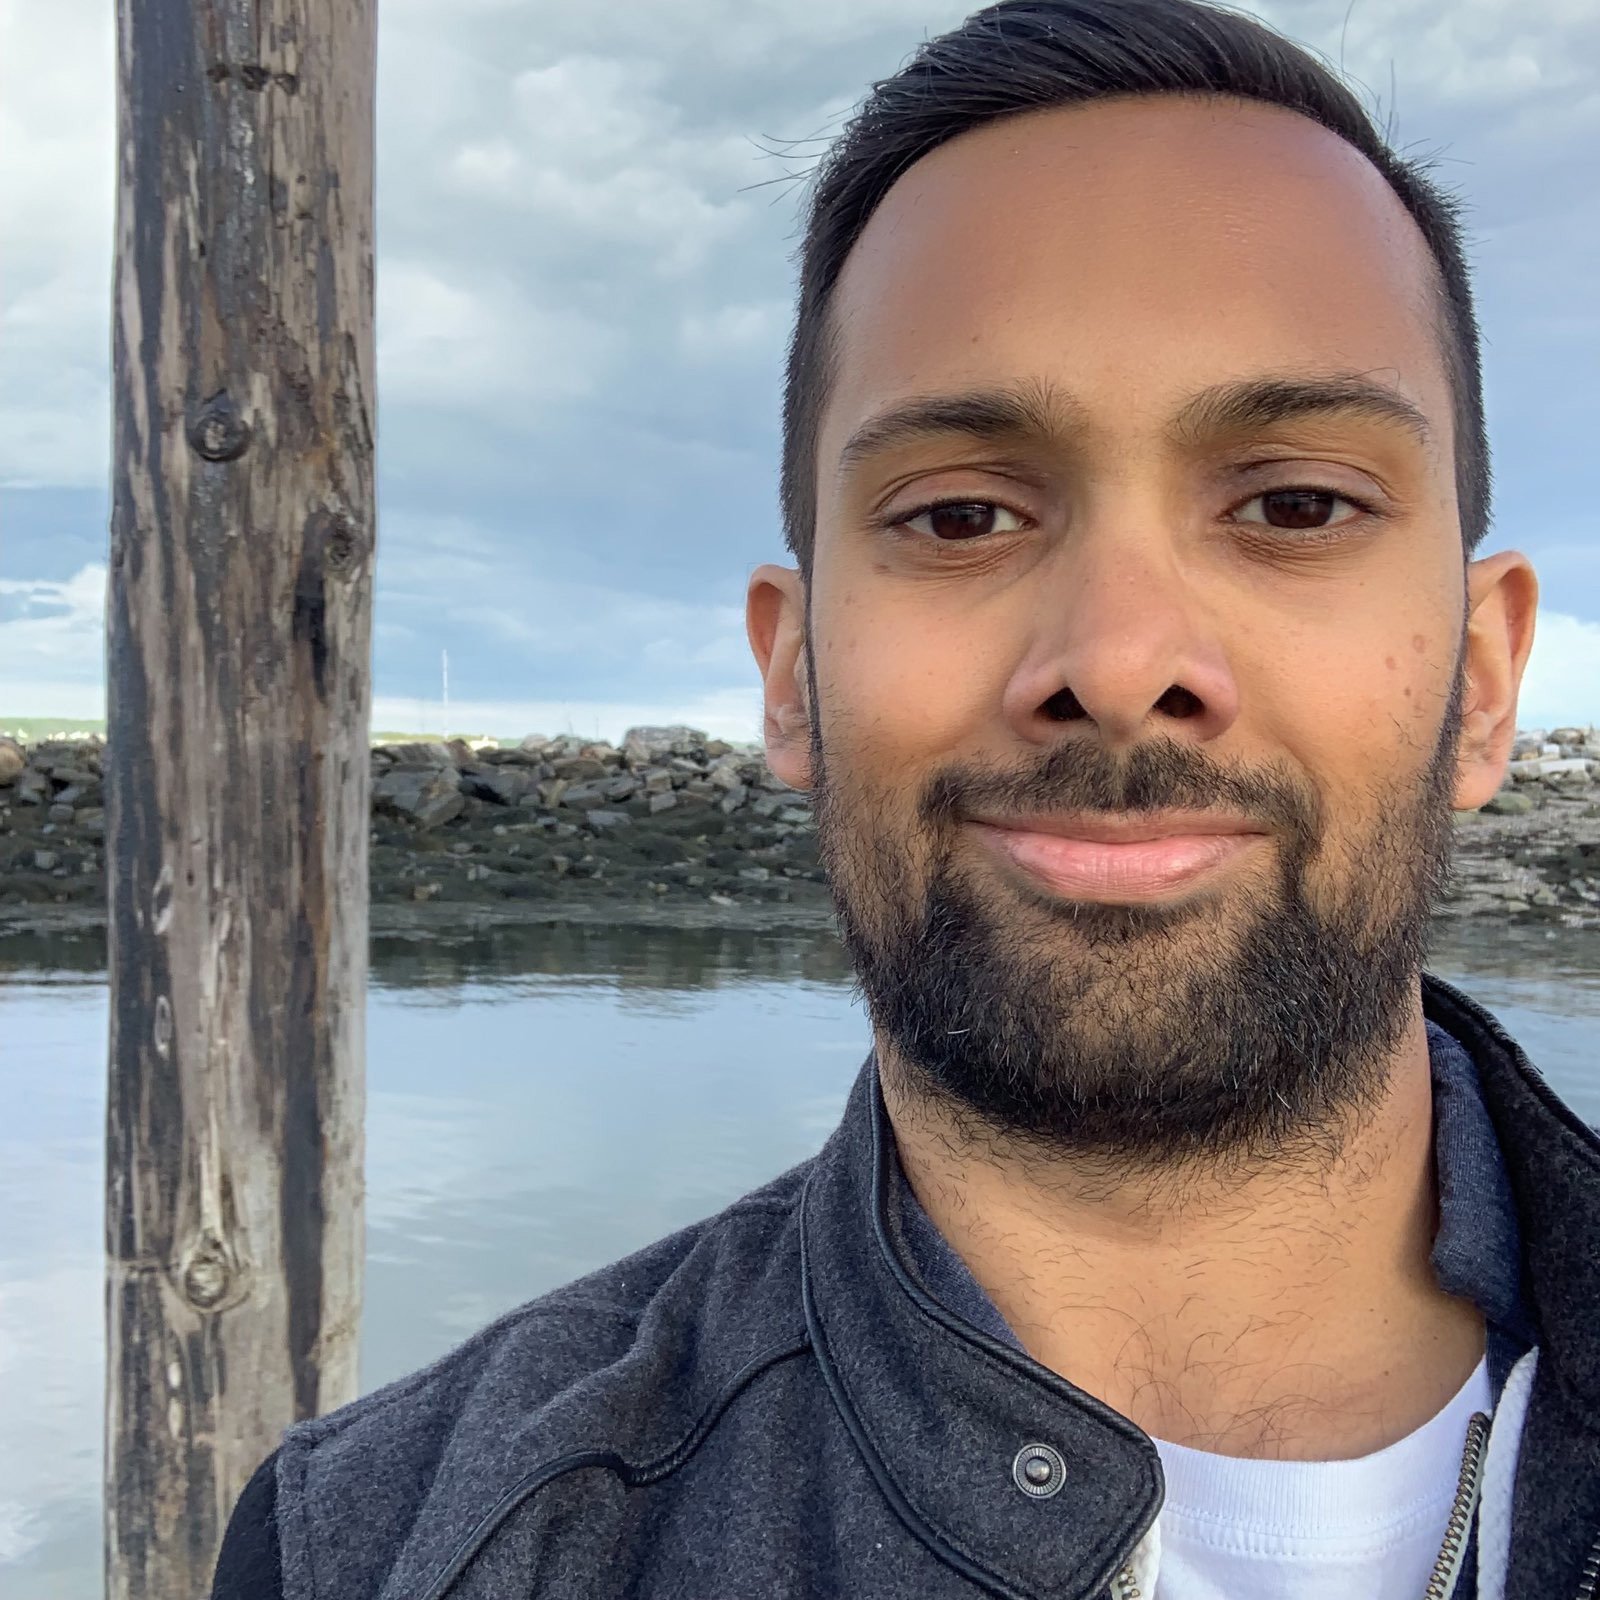 Ashik has light brown skin, short black hair, dark eyes and and a closely cropped black beard. he is smiling in front of a calm bay or pier. 